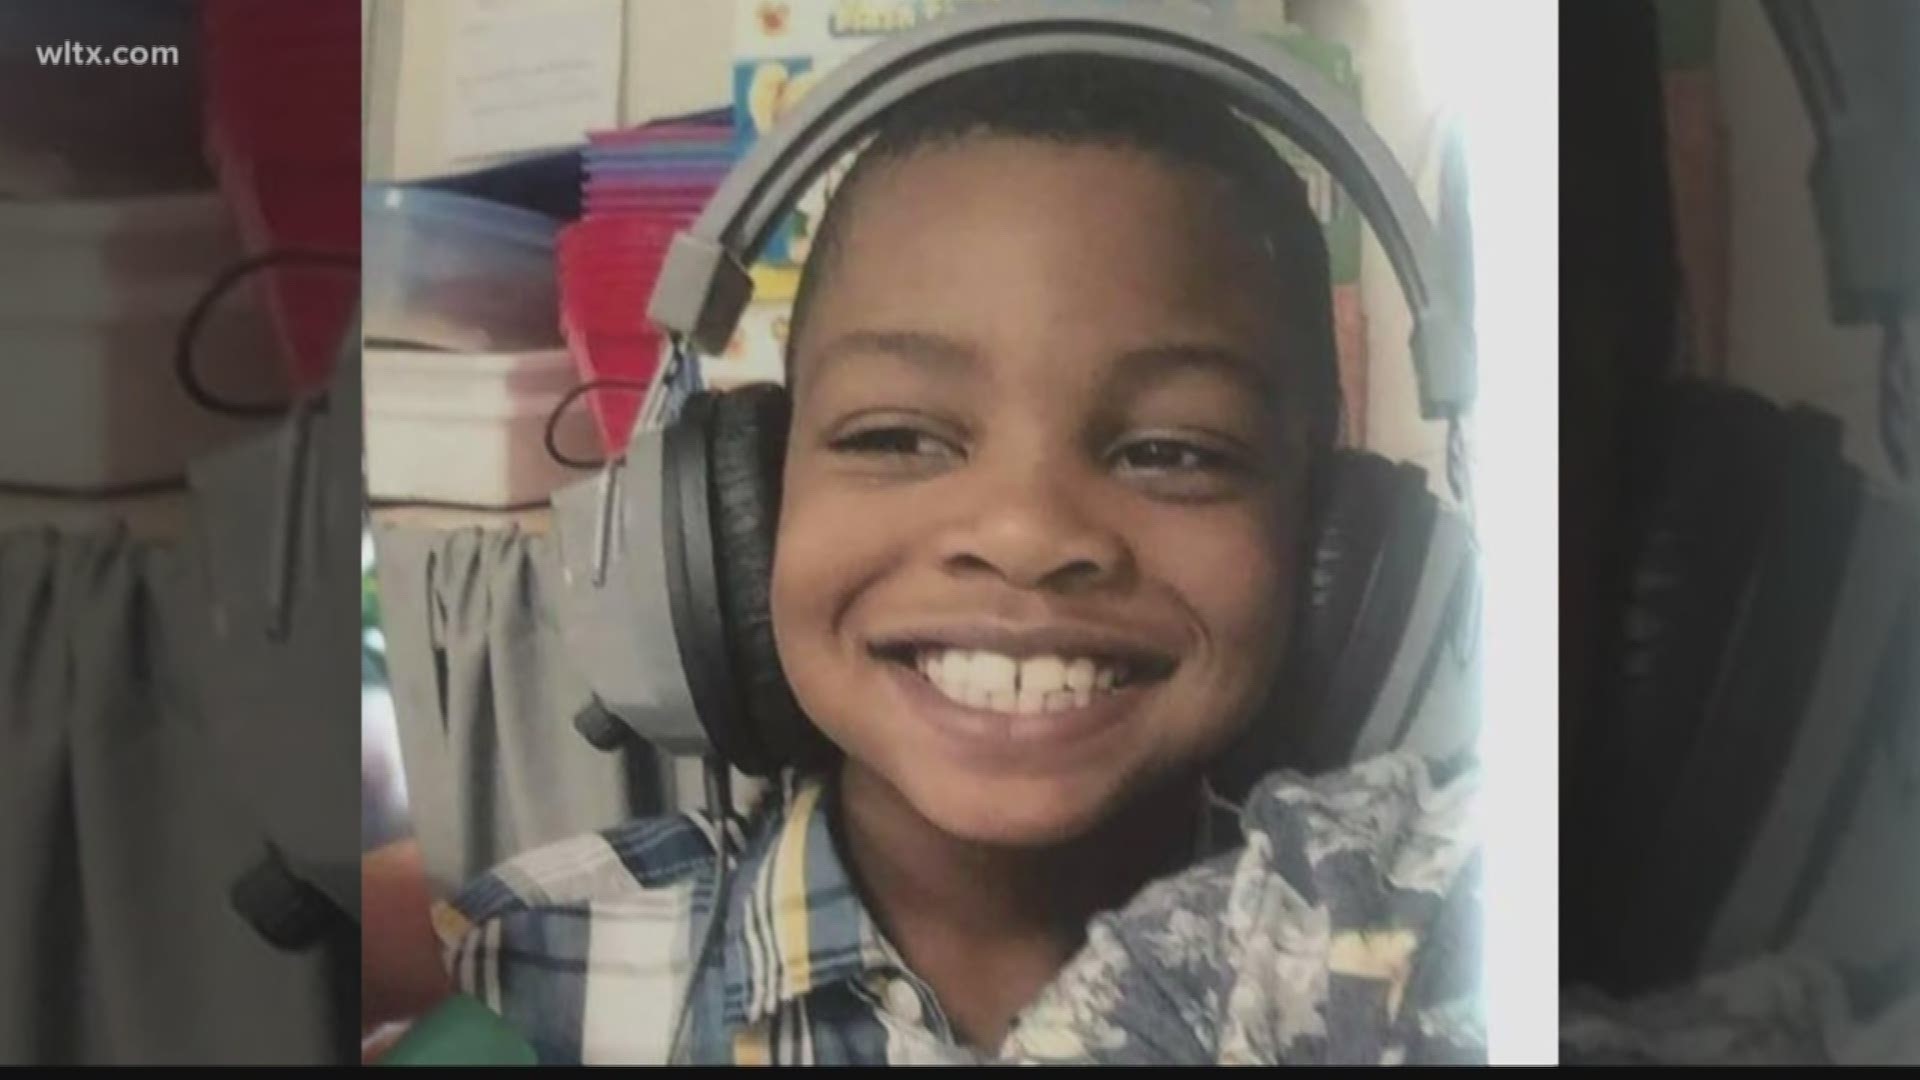 A 7-year-old shot in Newberry County over the weekend has died.